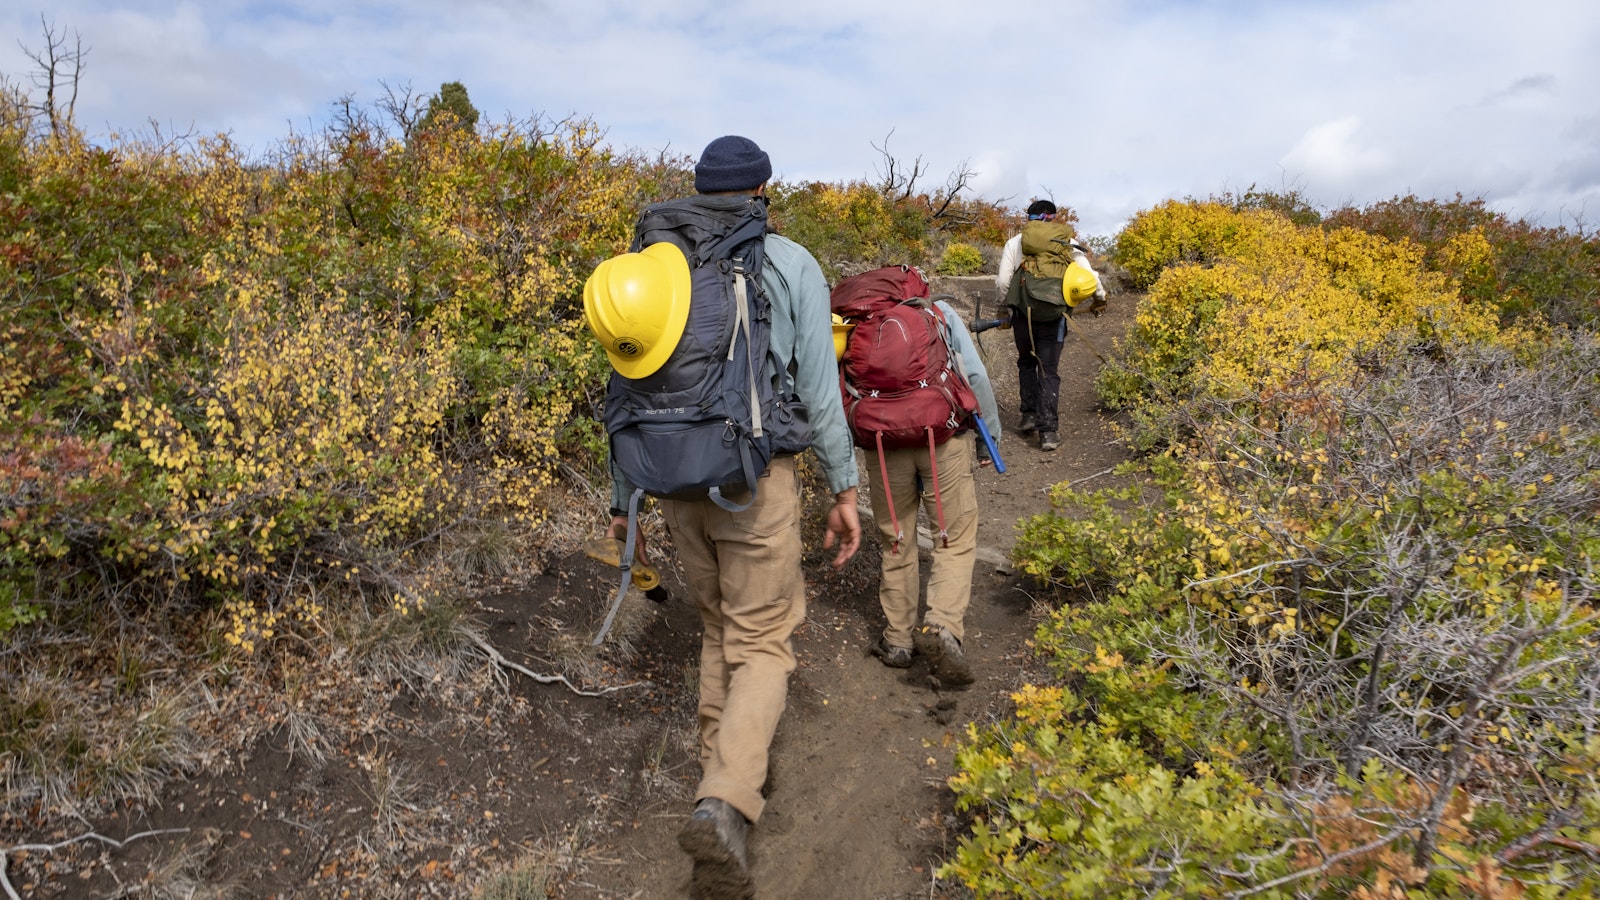 People walk up a dirt path through a field of ground plants. They carry backpacks and hard hats